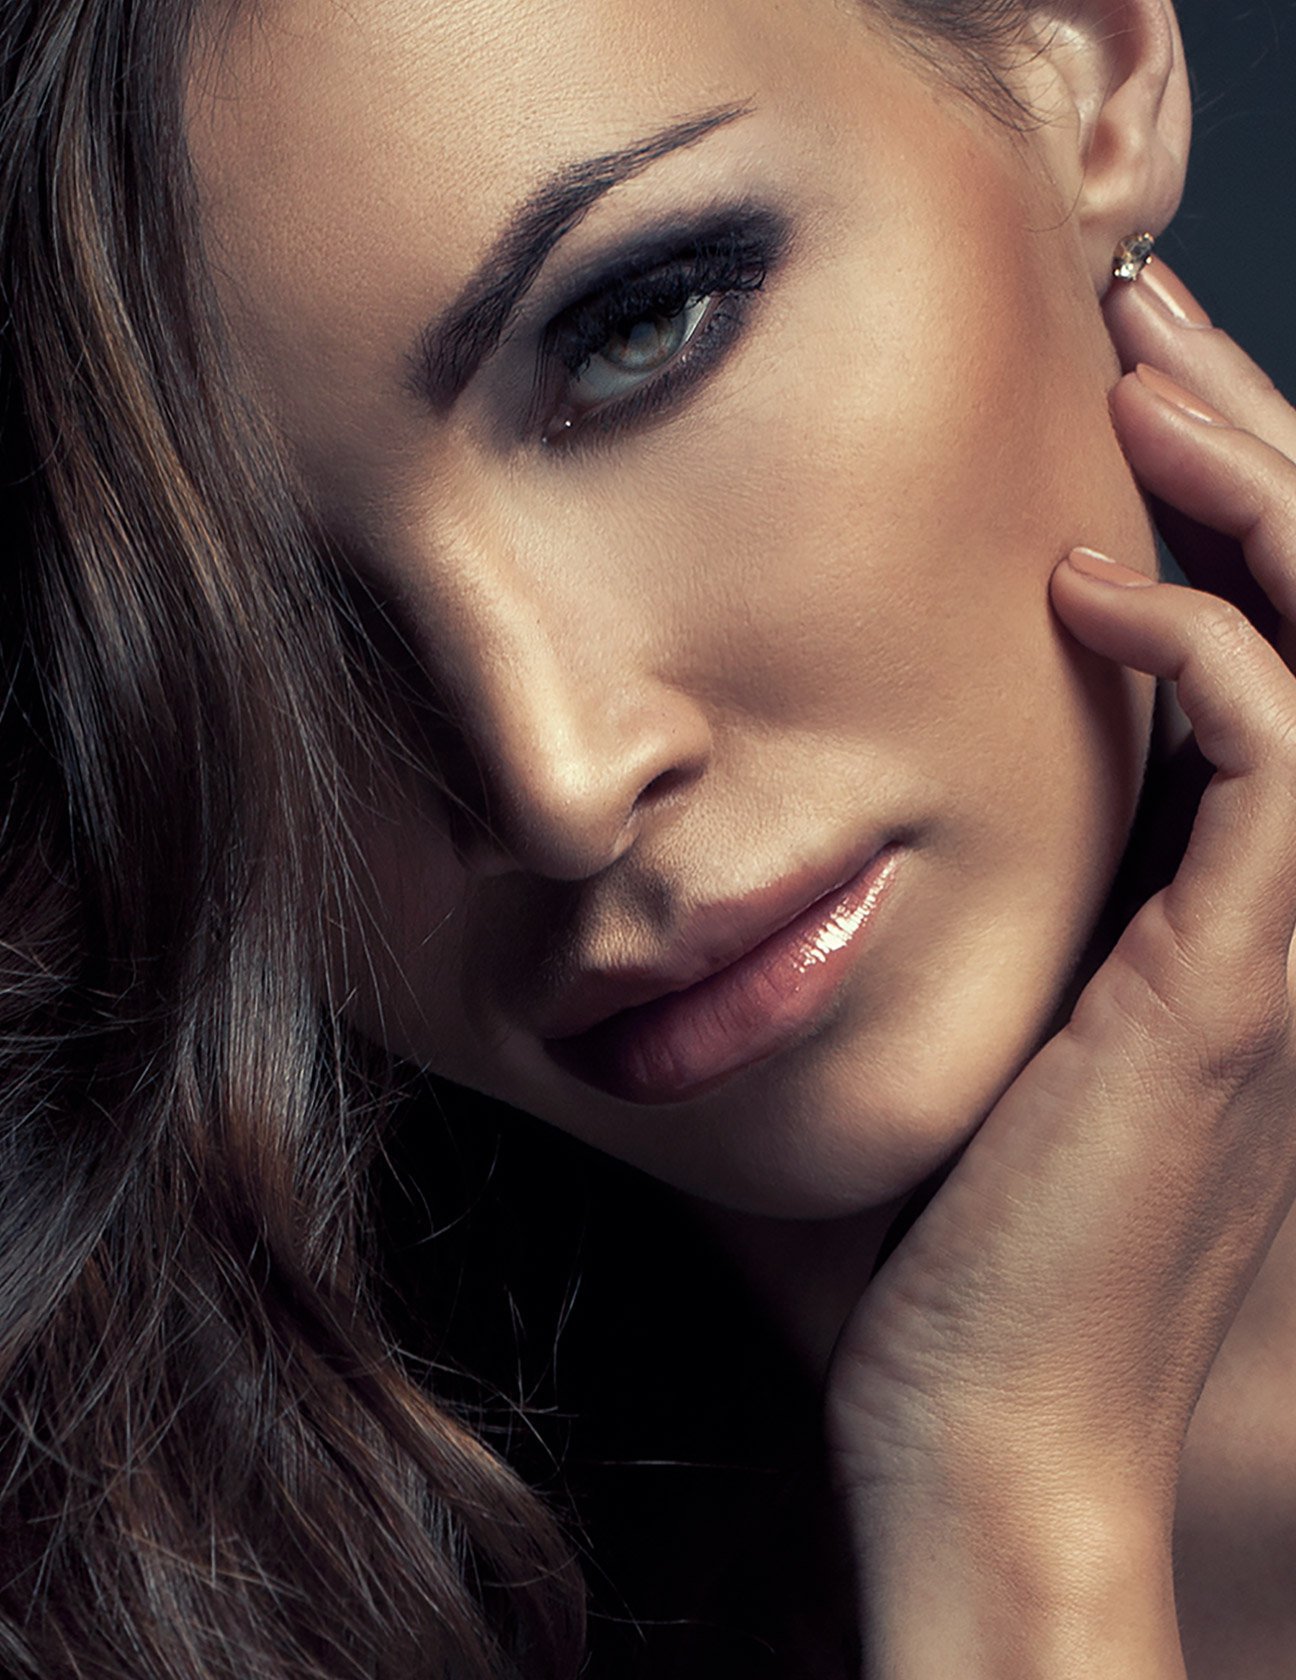 Orange County revision rhinoplasty model with brown hair